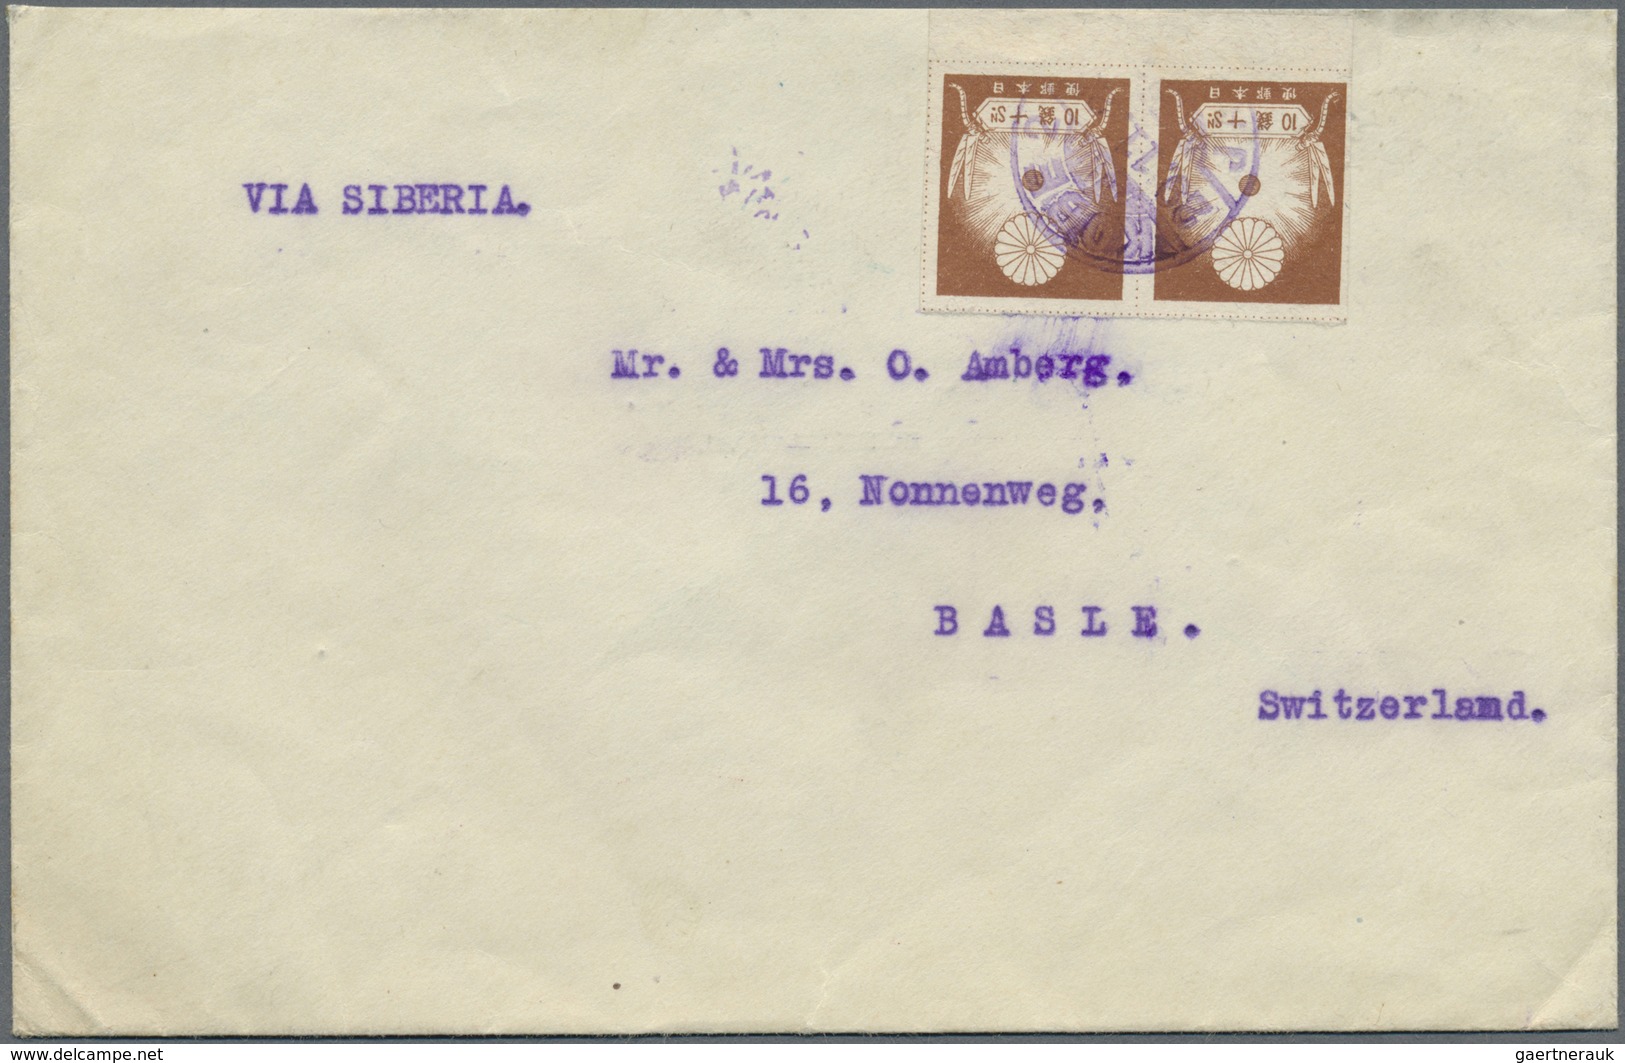 (*)/O/Br/ Japan: 1923, used earthquake accumulation on stockpages, also 4 S., 8 S. 20 S. mint, inc. 8 covers/